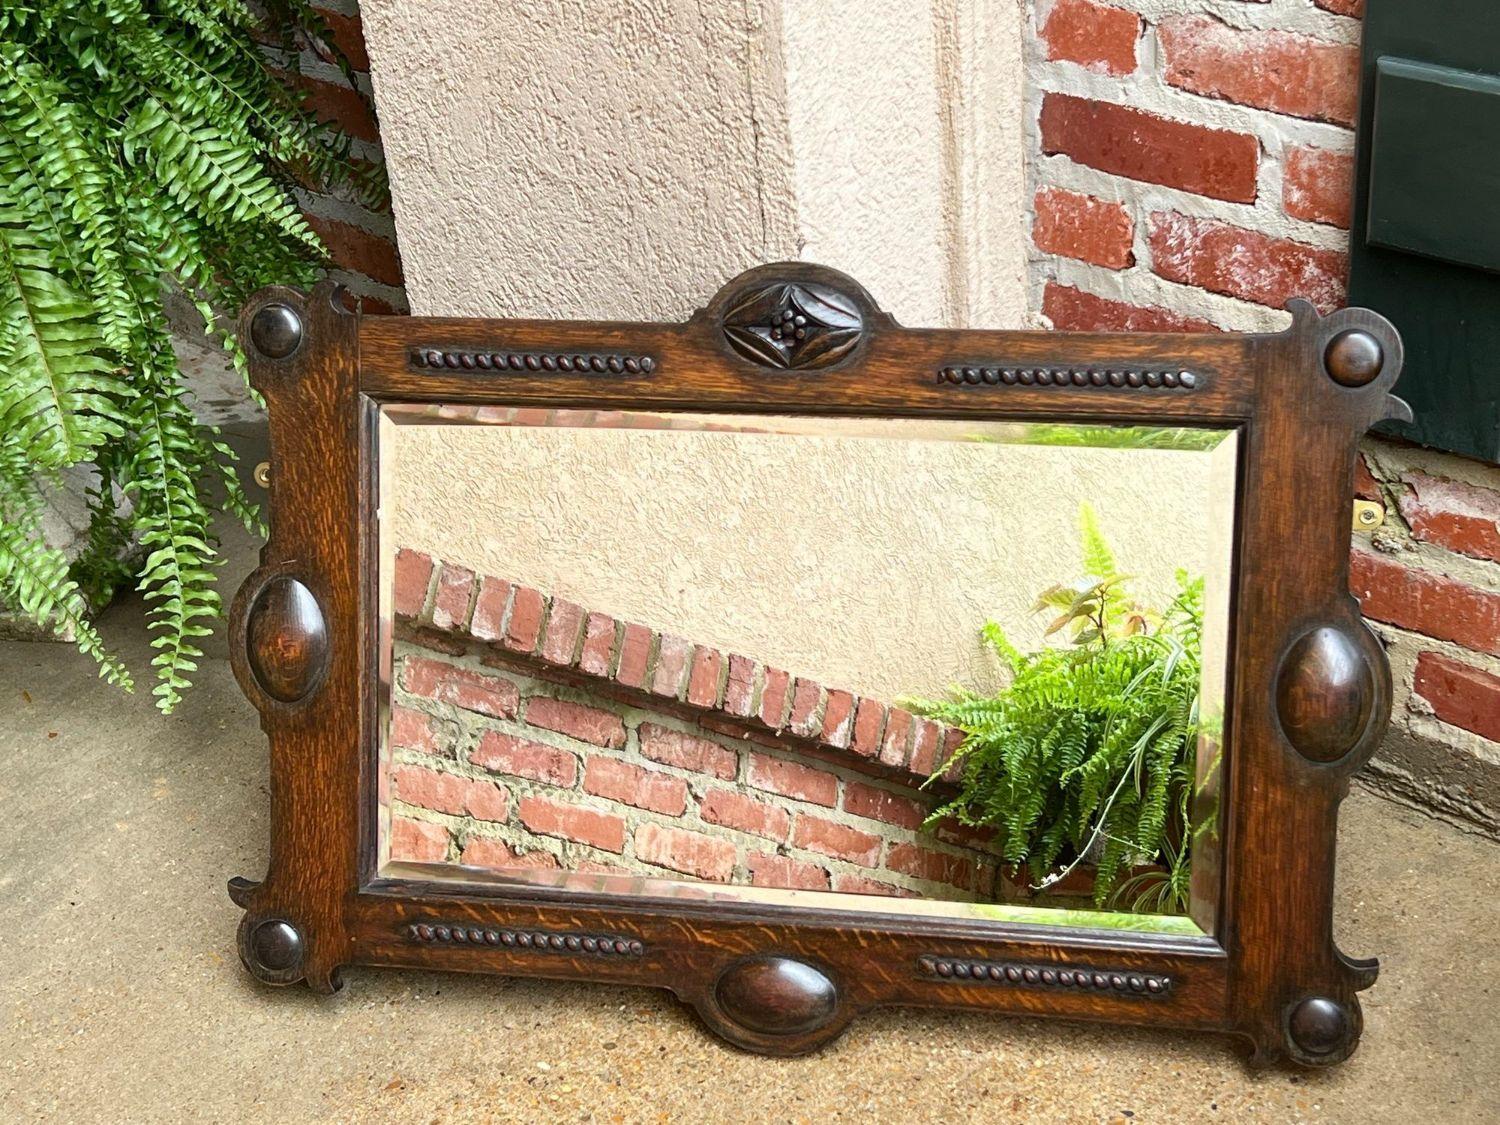 Antique English Beveled Wall Mirror Carved Oak Frame Jacobean Arts & Crafts.

Direct from England, another fabulous antique English wall mirror!  The large rectangular frame features a wide, dark oak band with beaded trim, and large oval medallions